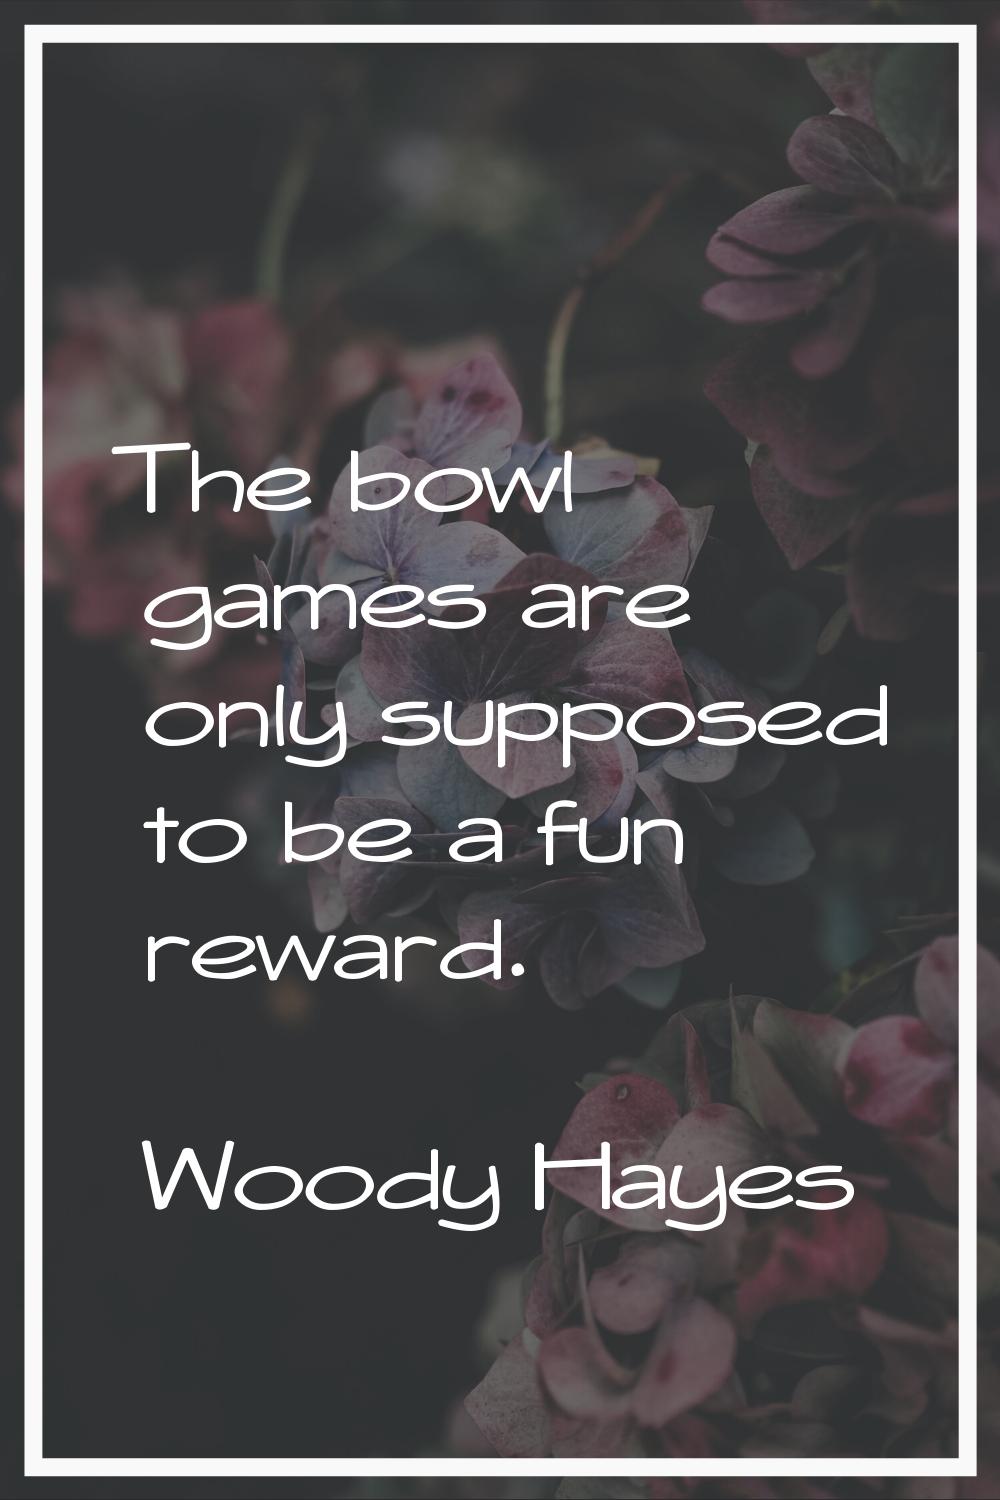 The bowl games are only supposed to be a fun reward.